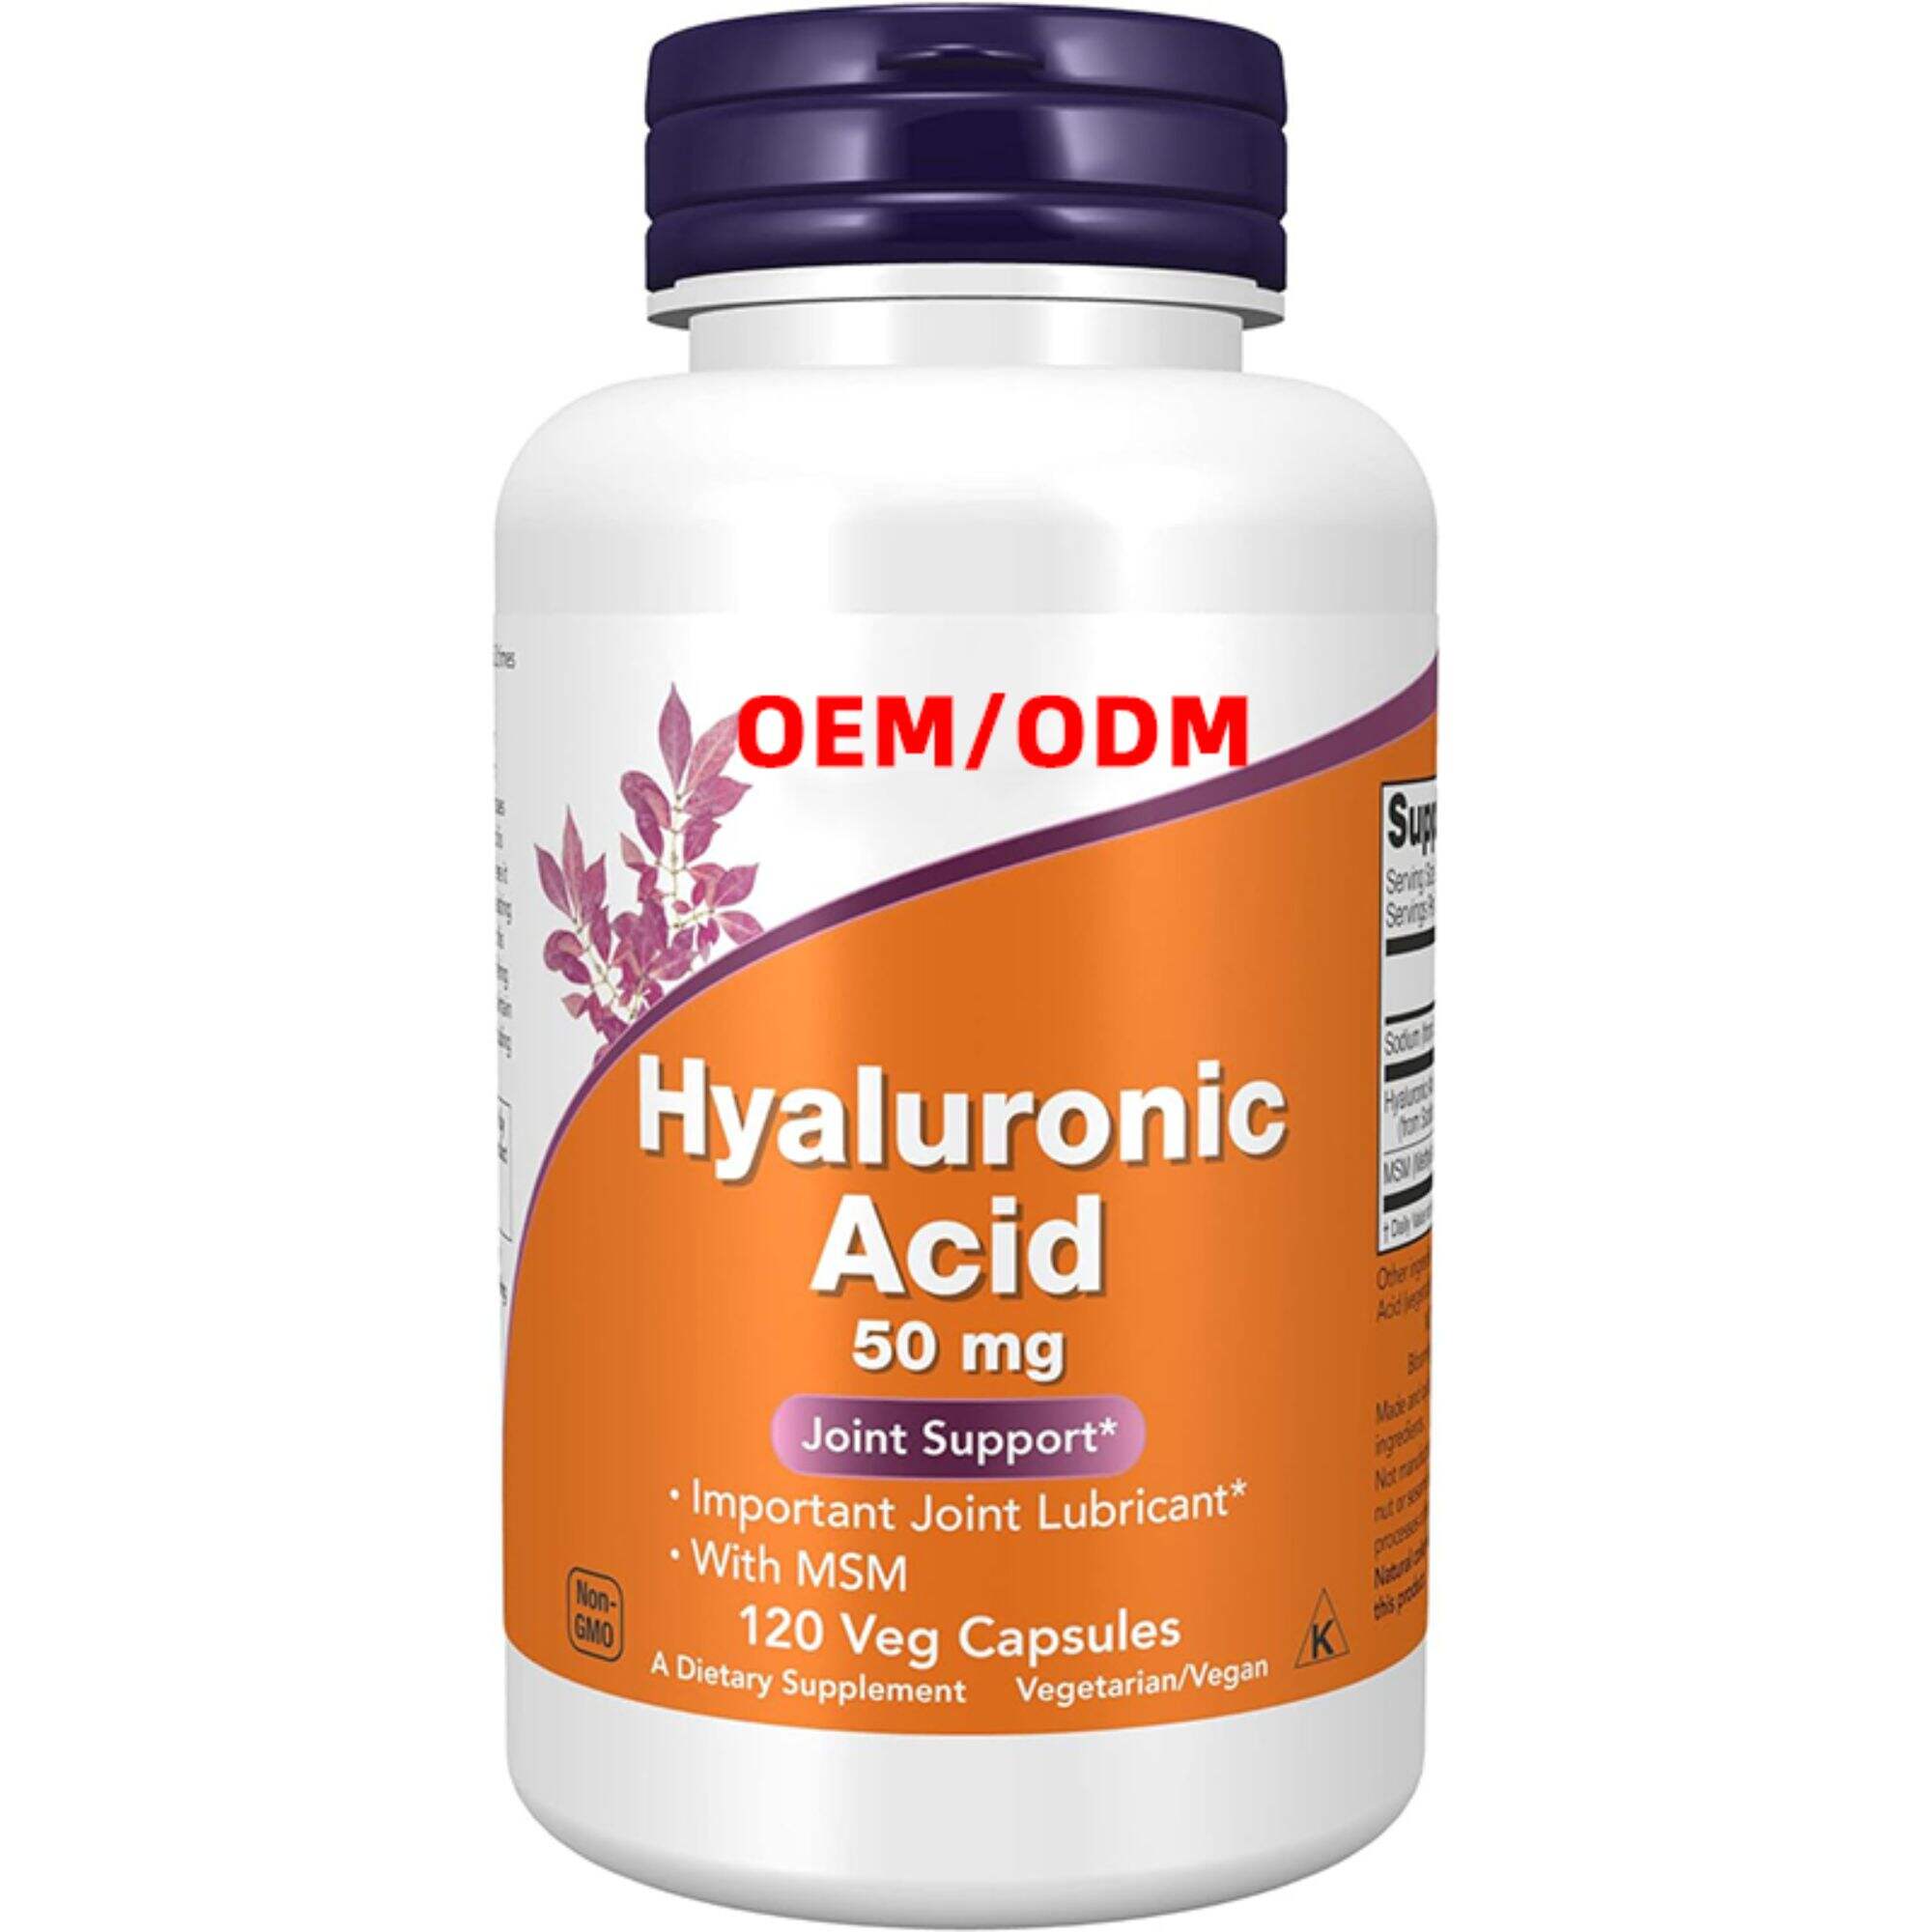 Joint Support Hyaluronic Acid 50 mg with MSM 120 Veg Capsules